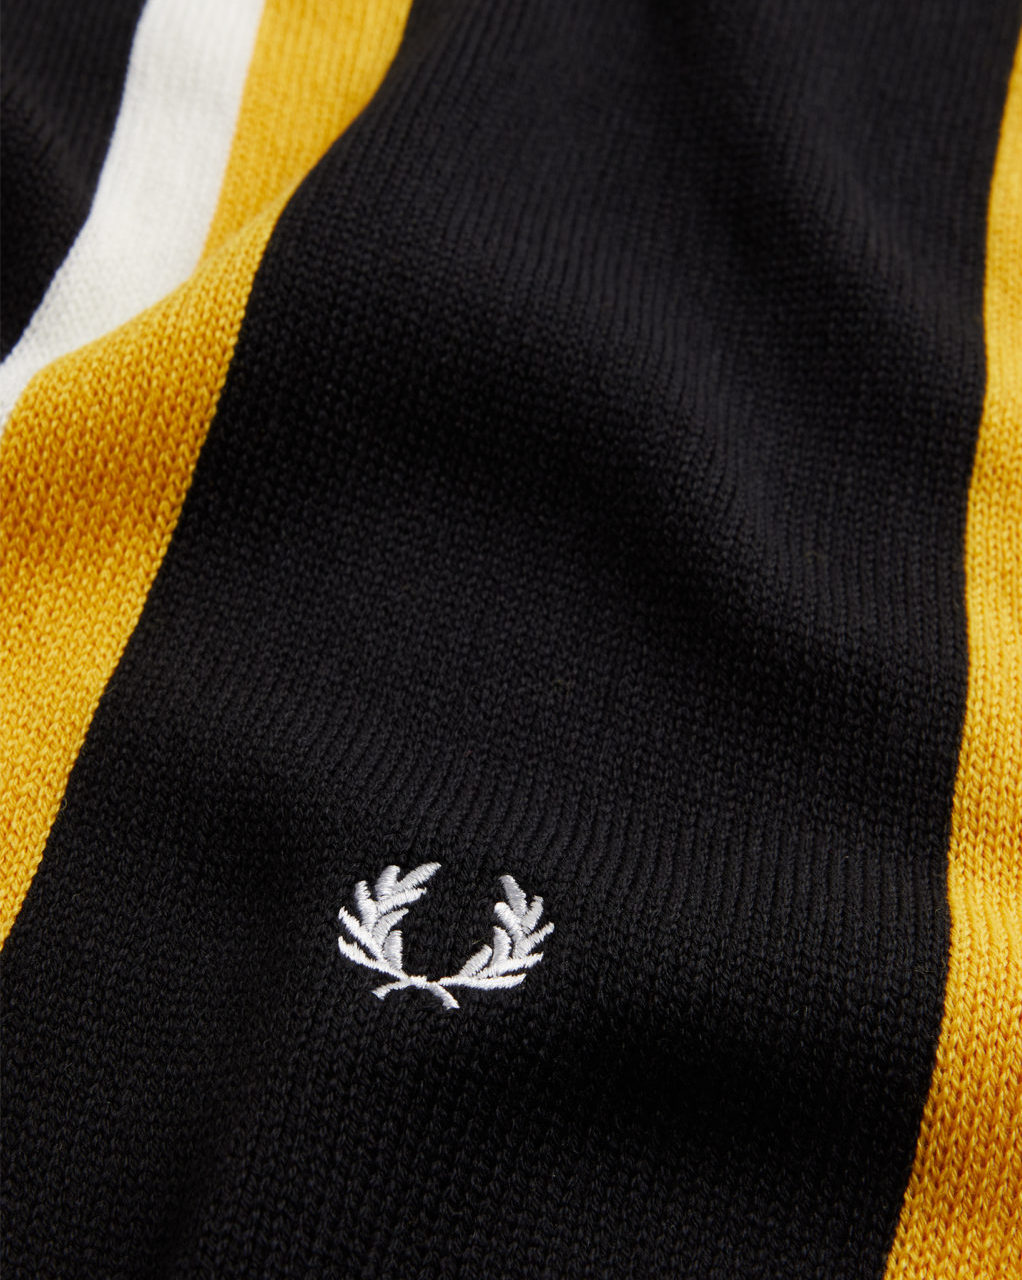 A detailed packshot fashion image showcasing a black and yellow striped scarf from Fred Perry, professionally captured by I Heart Studios.